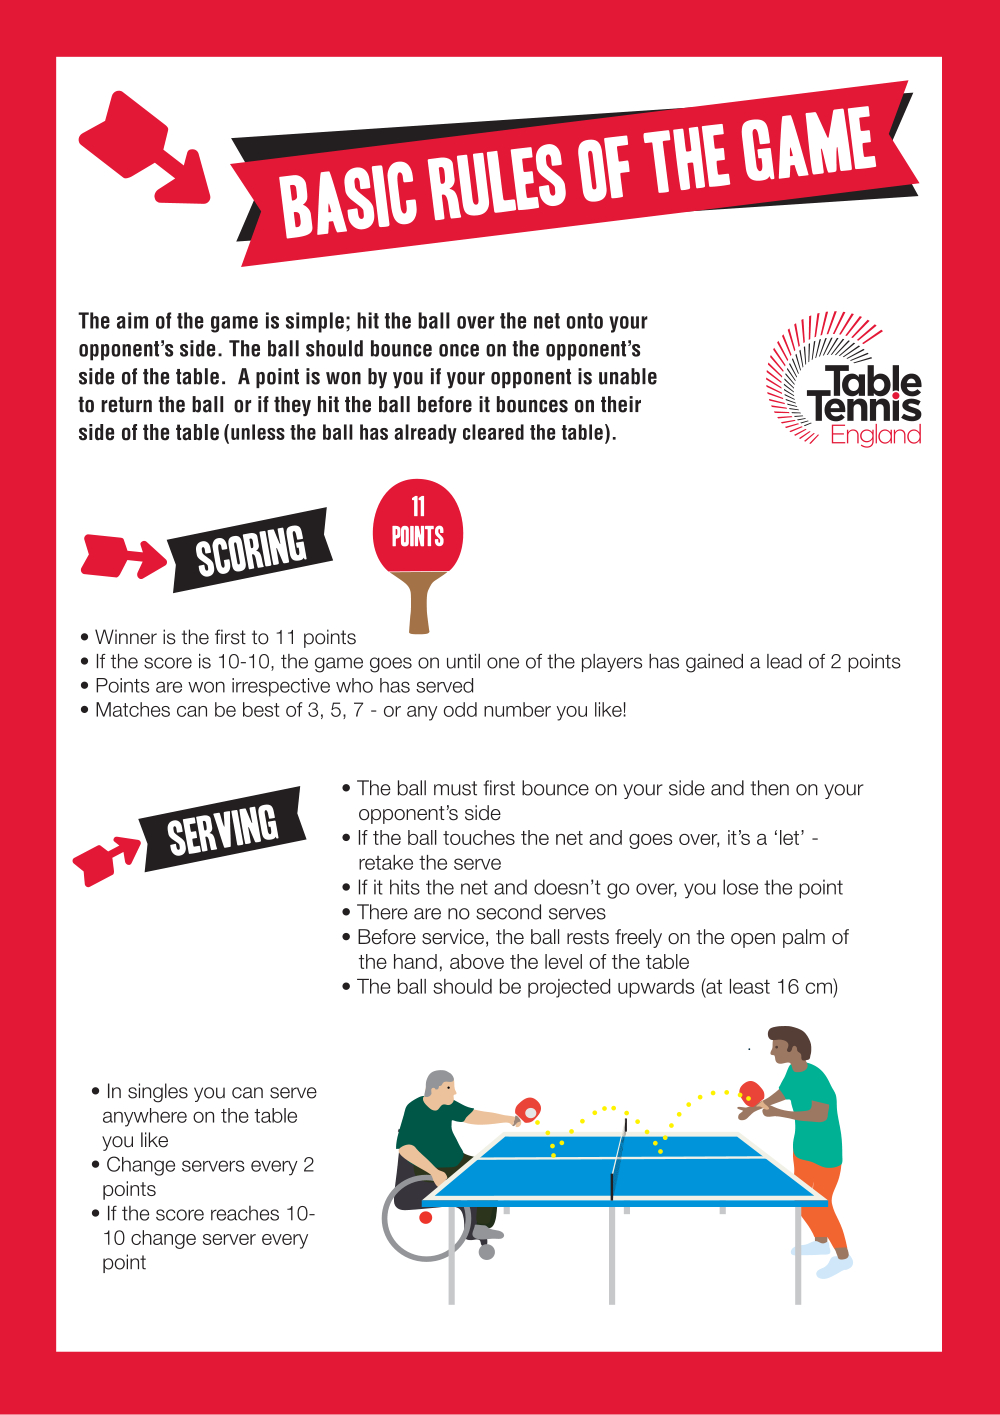 The Basic Rules of Table Tennis